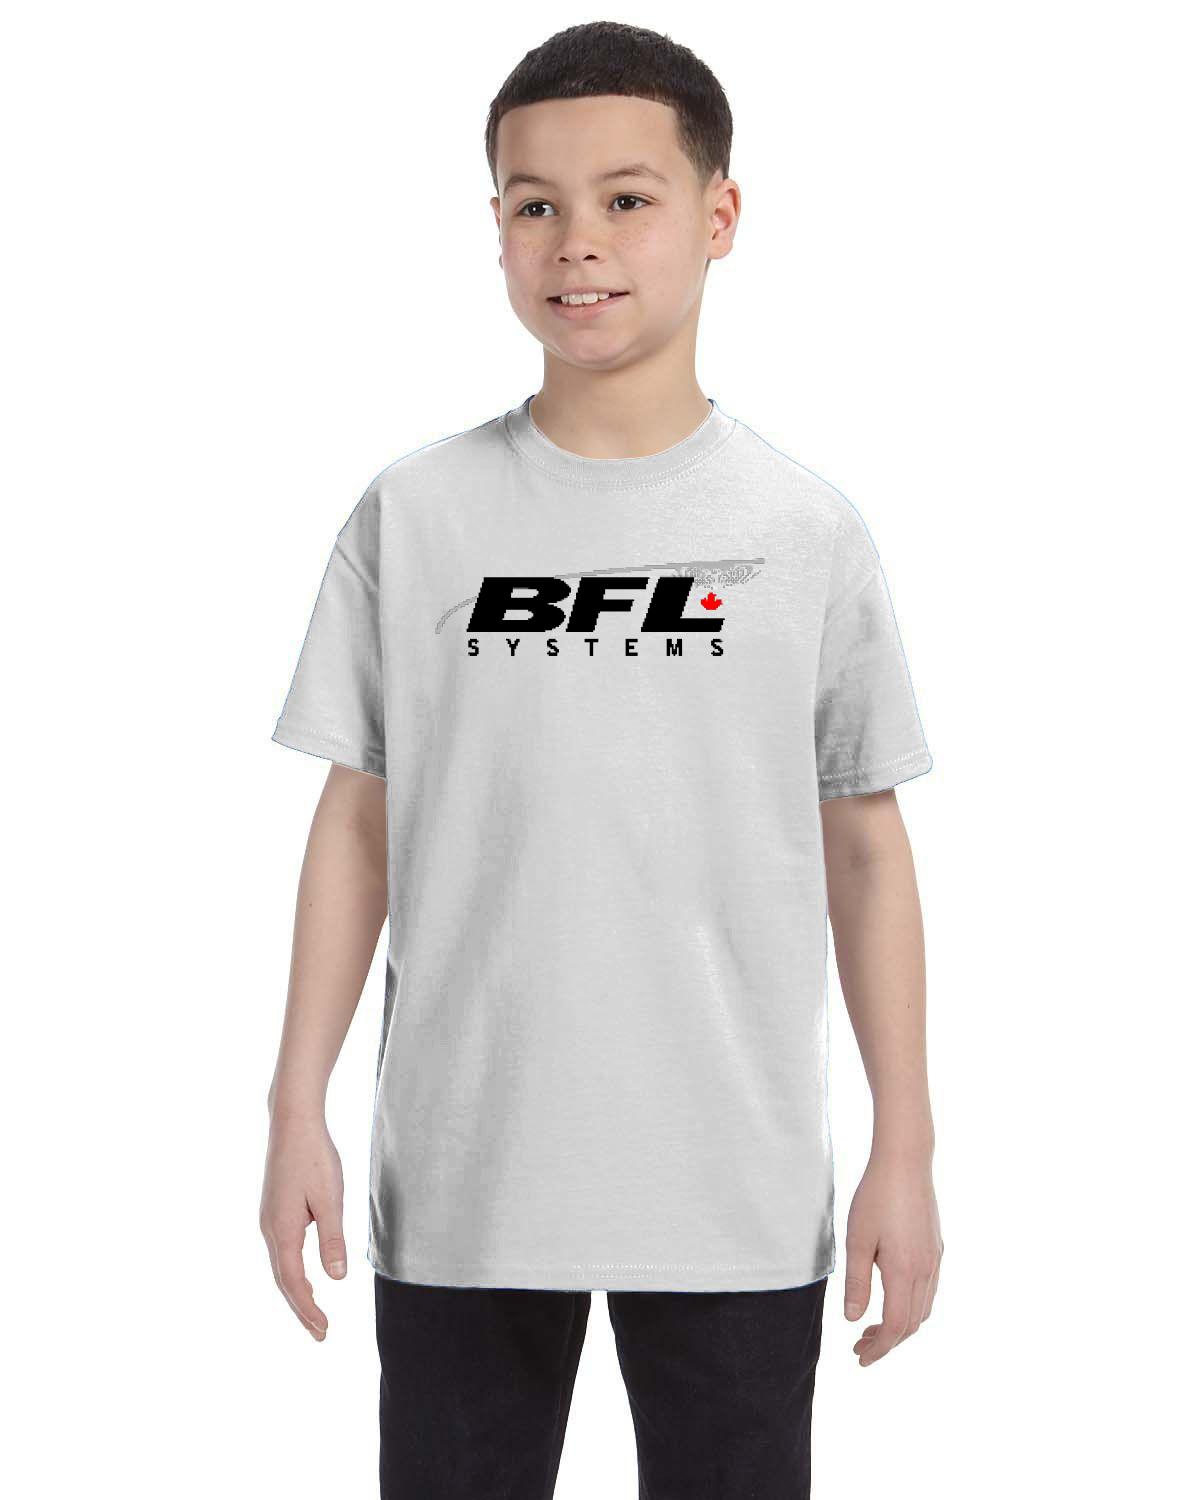 BFL Systems Kid's T-Shirt